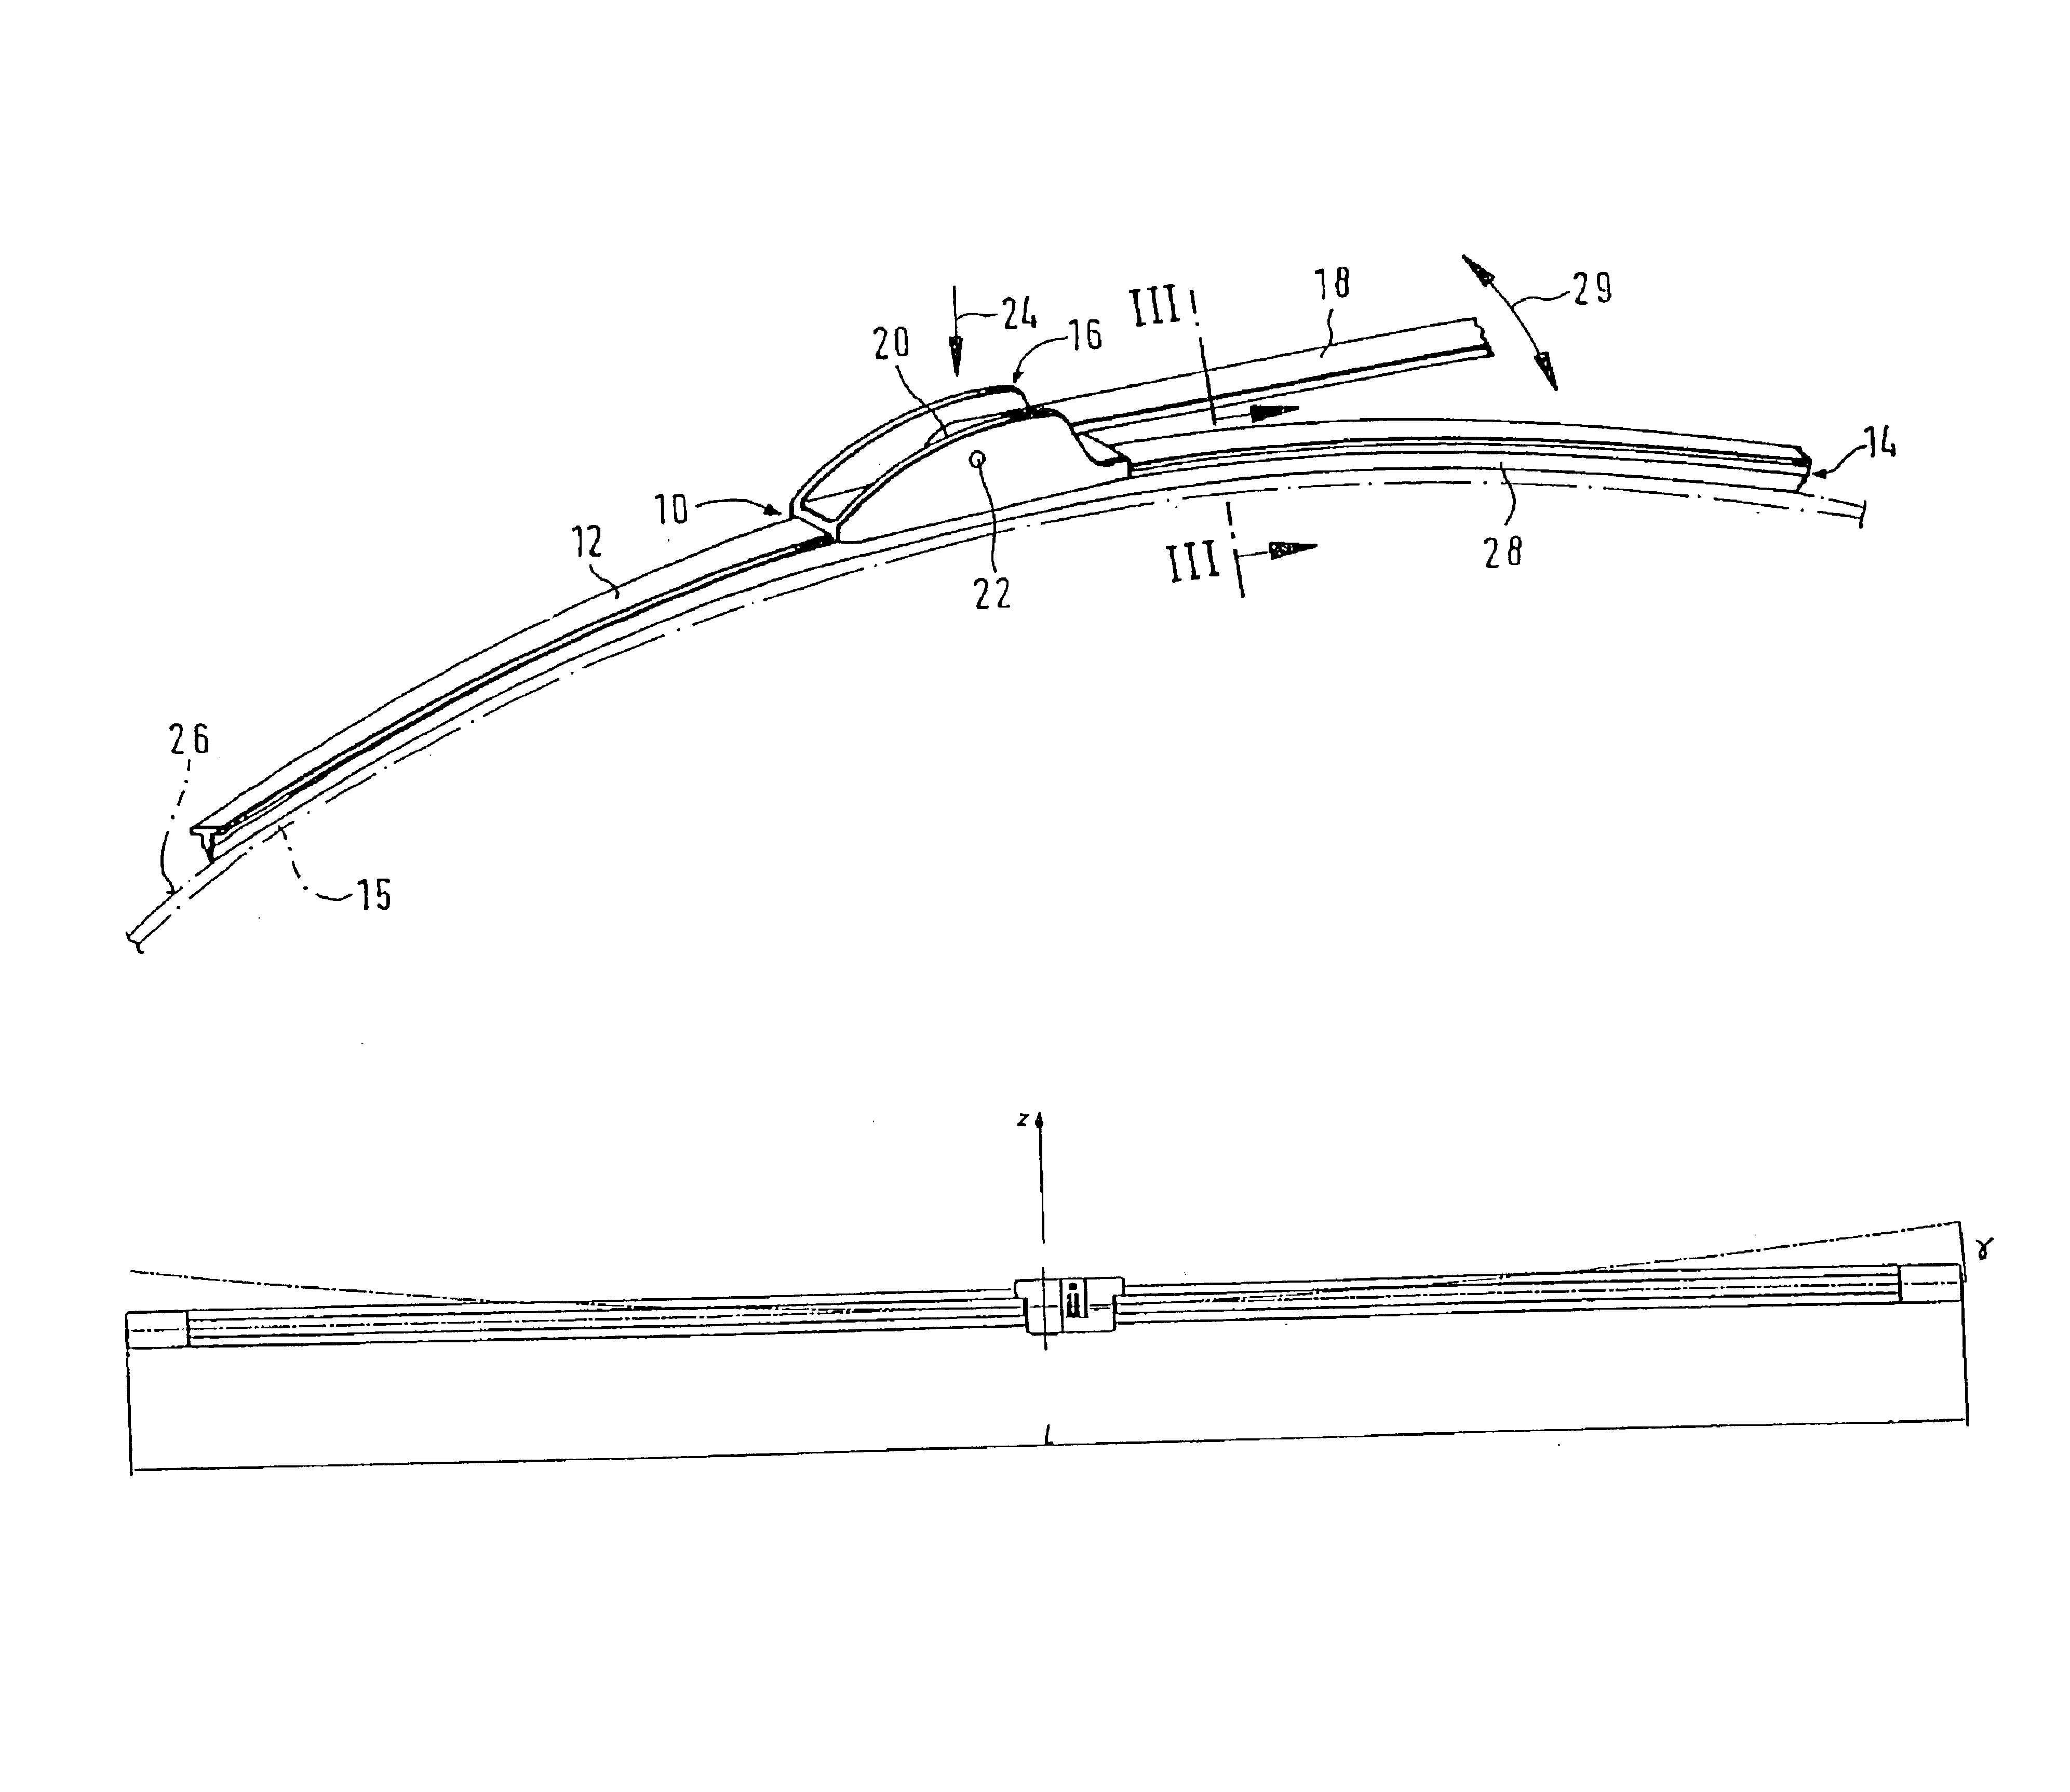 Wiper blade for windshields, especially automobile windshields, and method for the production thereof